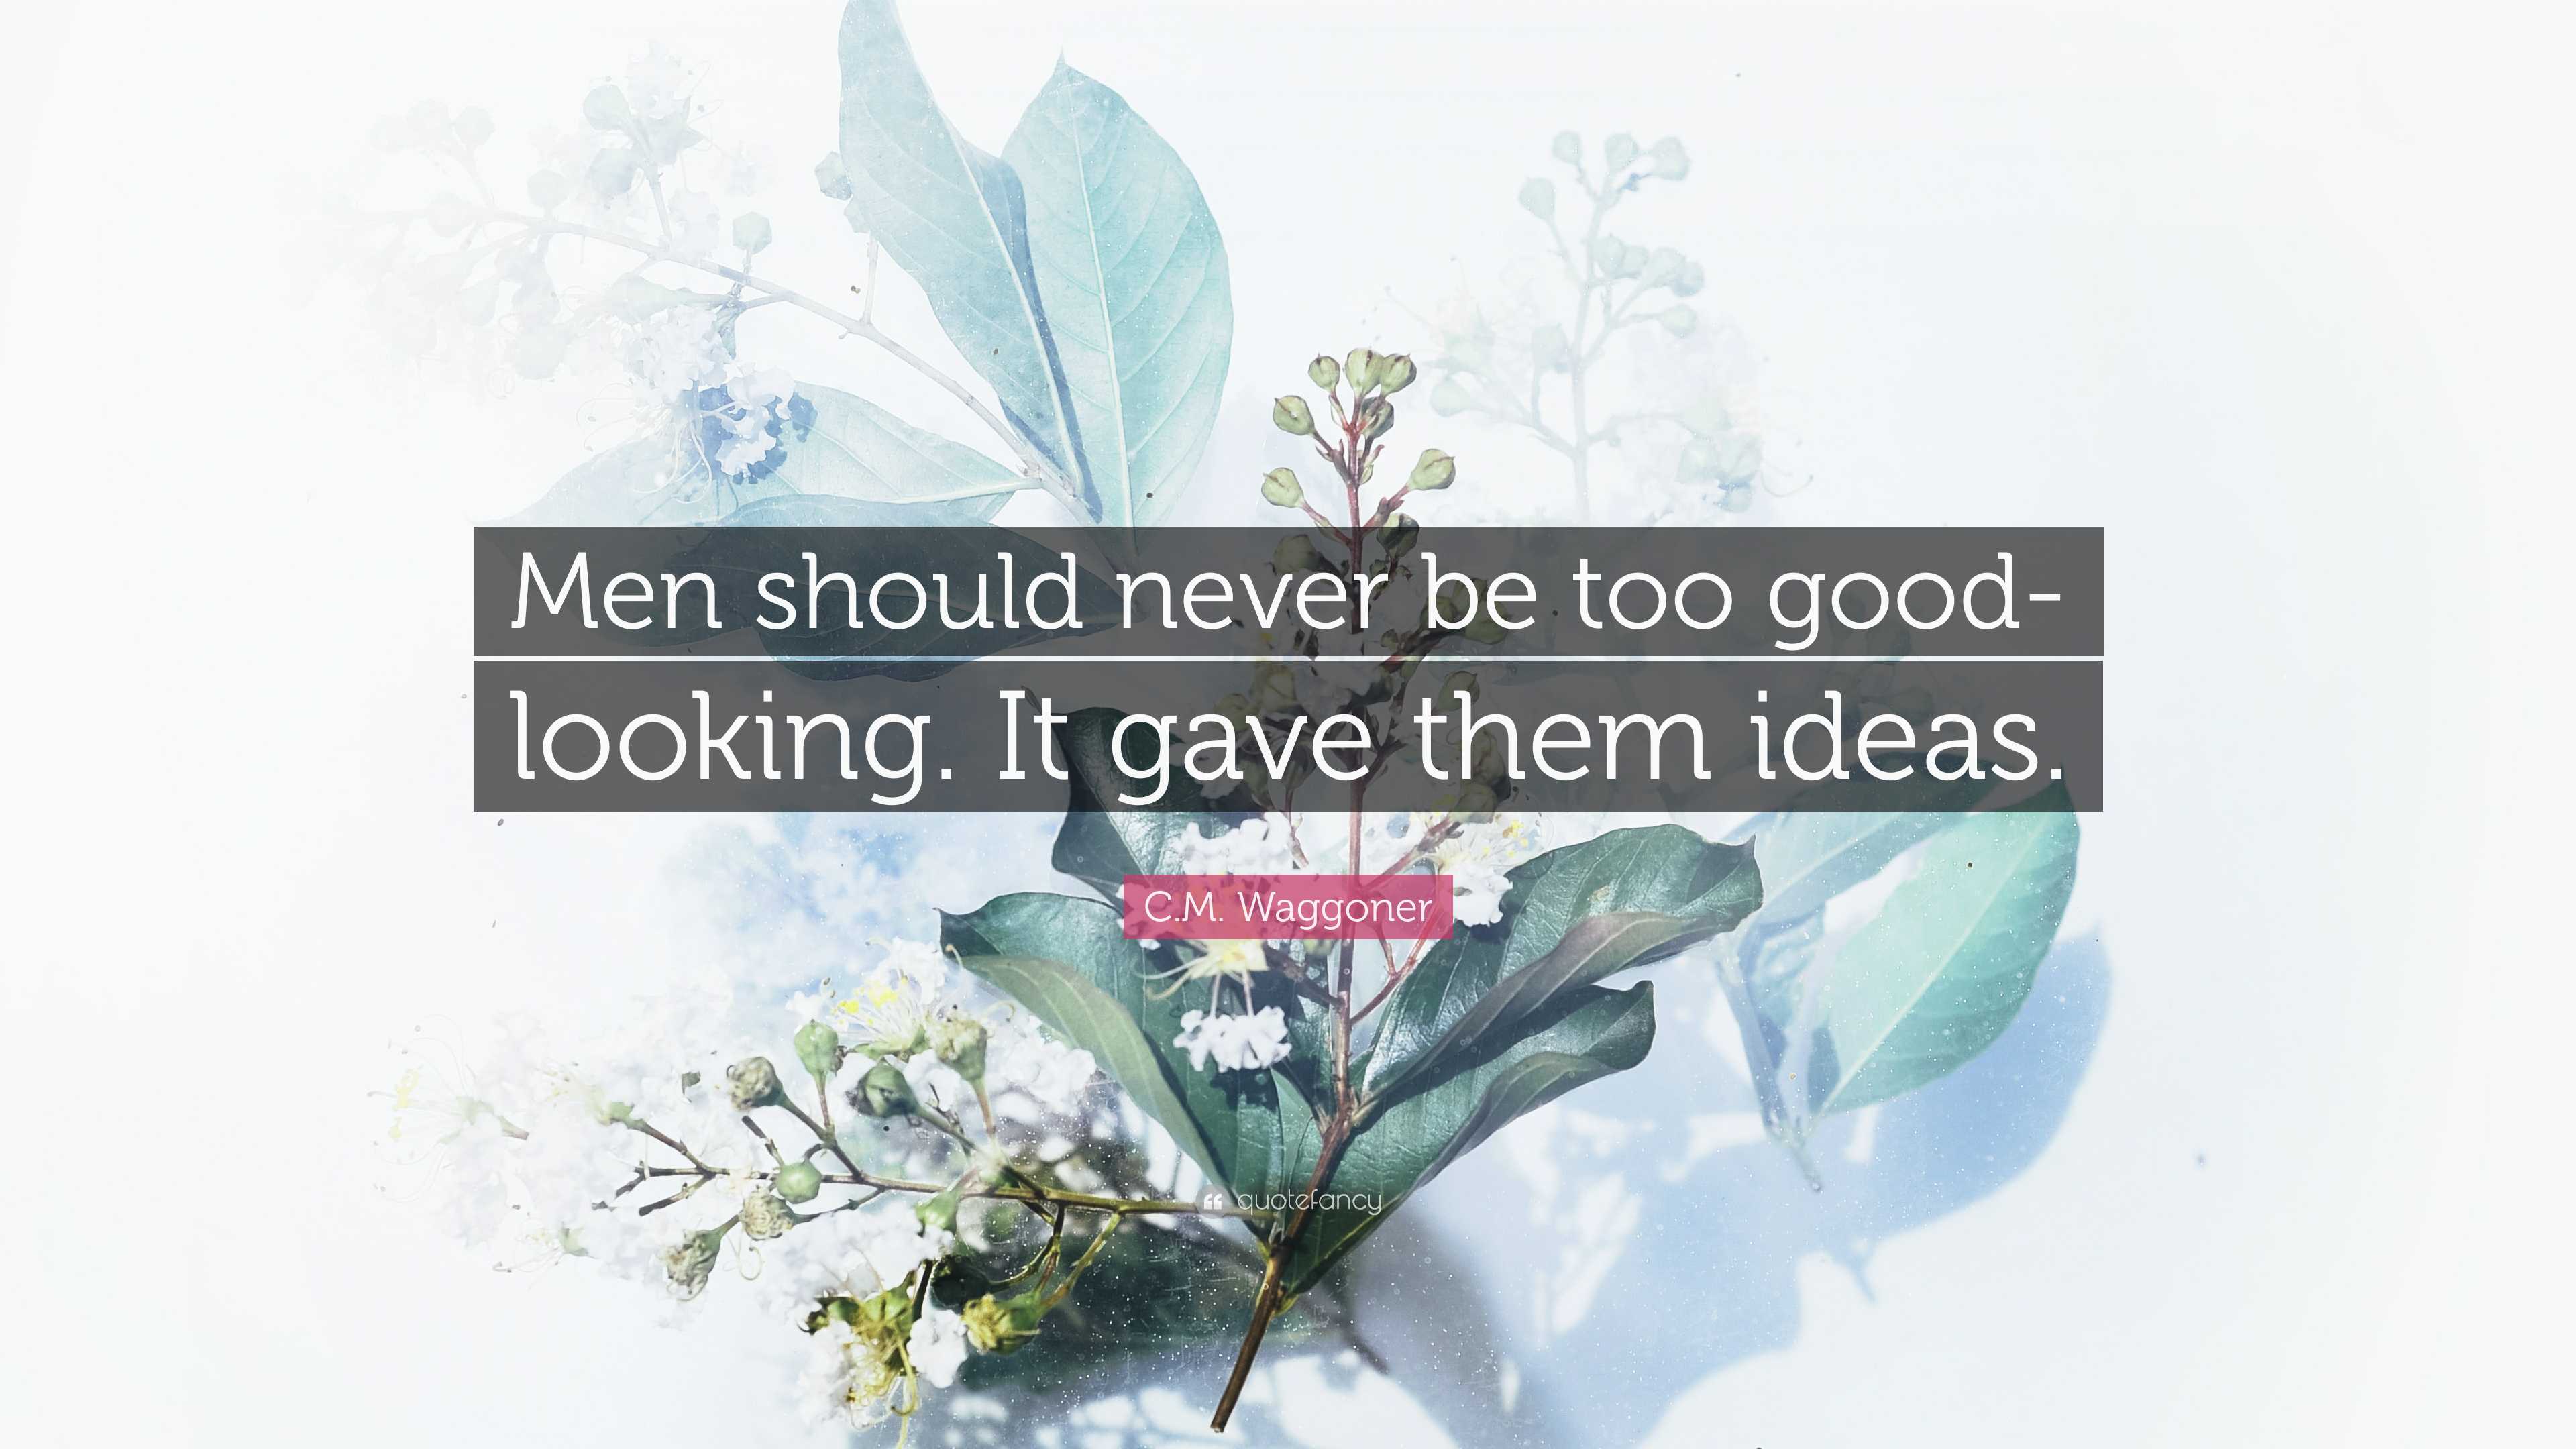 Men who are too good looking are never good - Quote